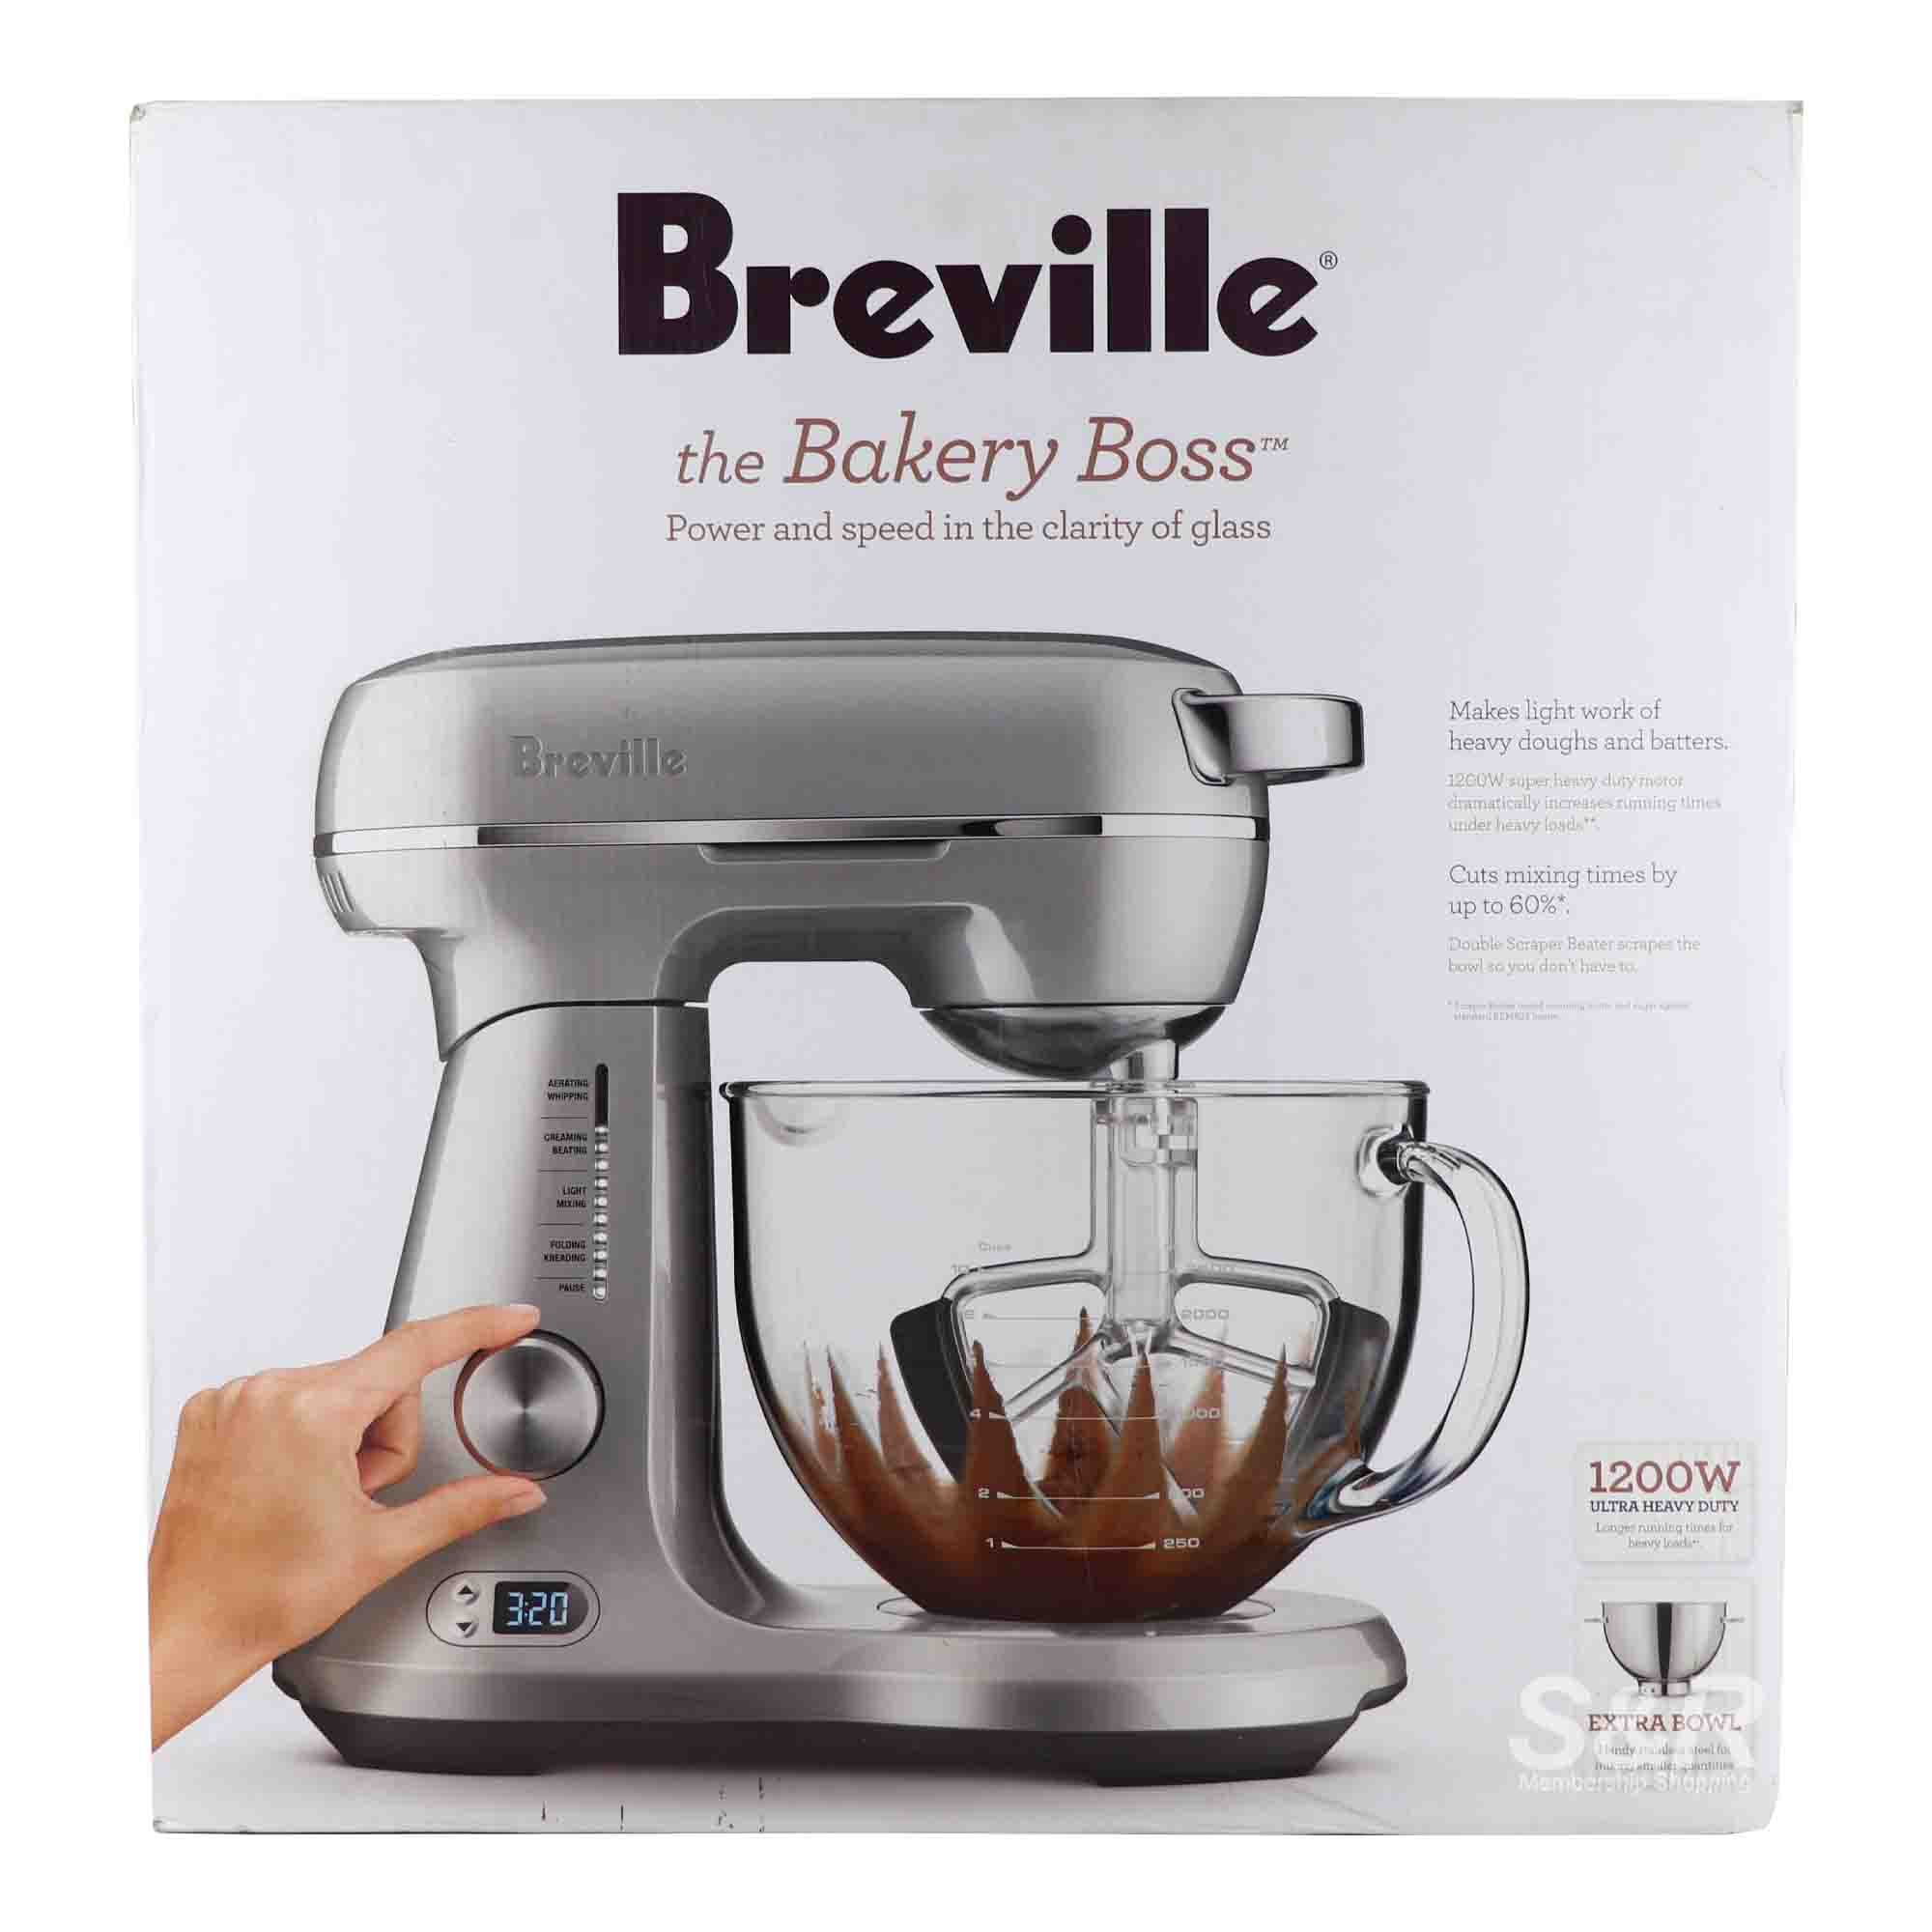 NEW Breville BEM825BAL the Bakery Chef Mixer RARE 'BRUSHED METAL'  21614056962